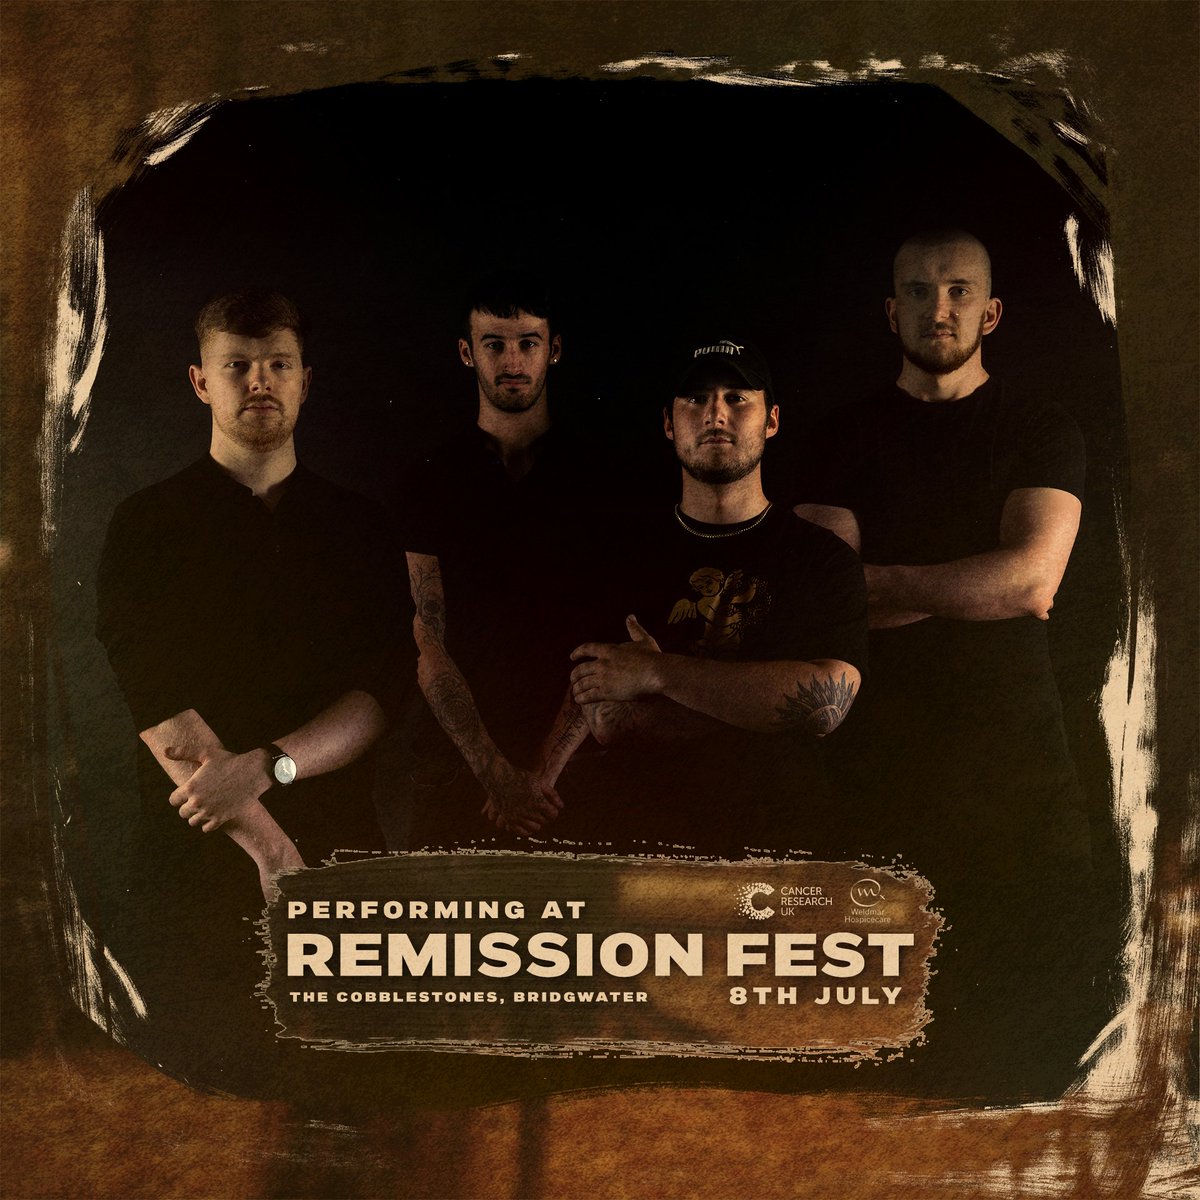 We are incredibly honoured to be playing Remission Festival at The Cobblestones in Bridgwater. An amazing festival with an amazing cause, raising money for Cancer Research UK and Weldmar Hospicecare.

Can't wait to see you all.